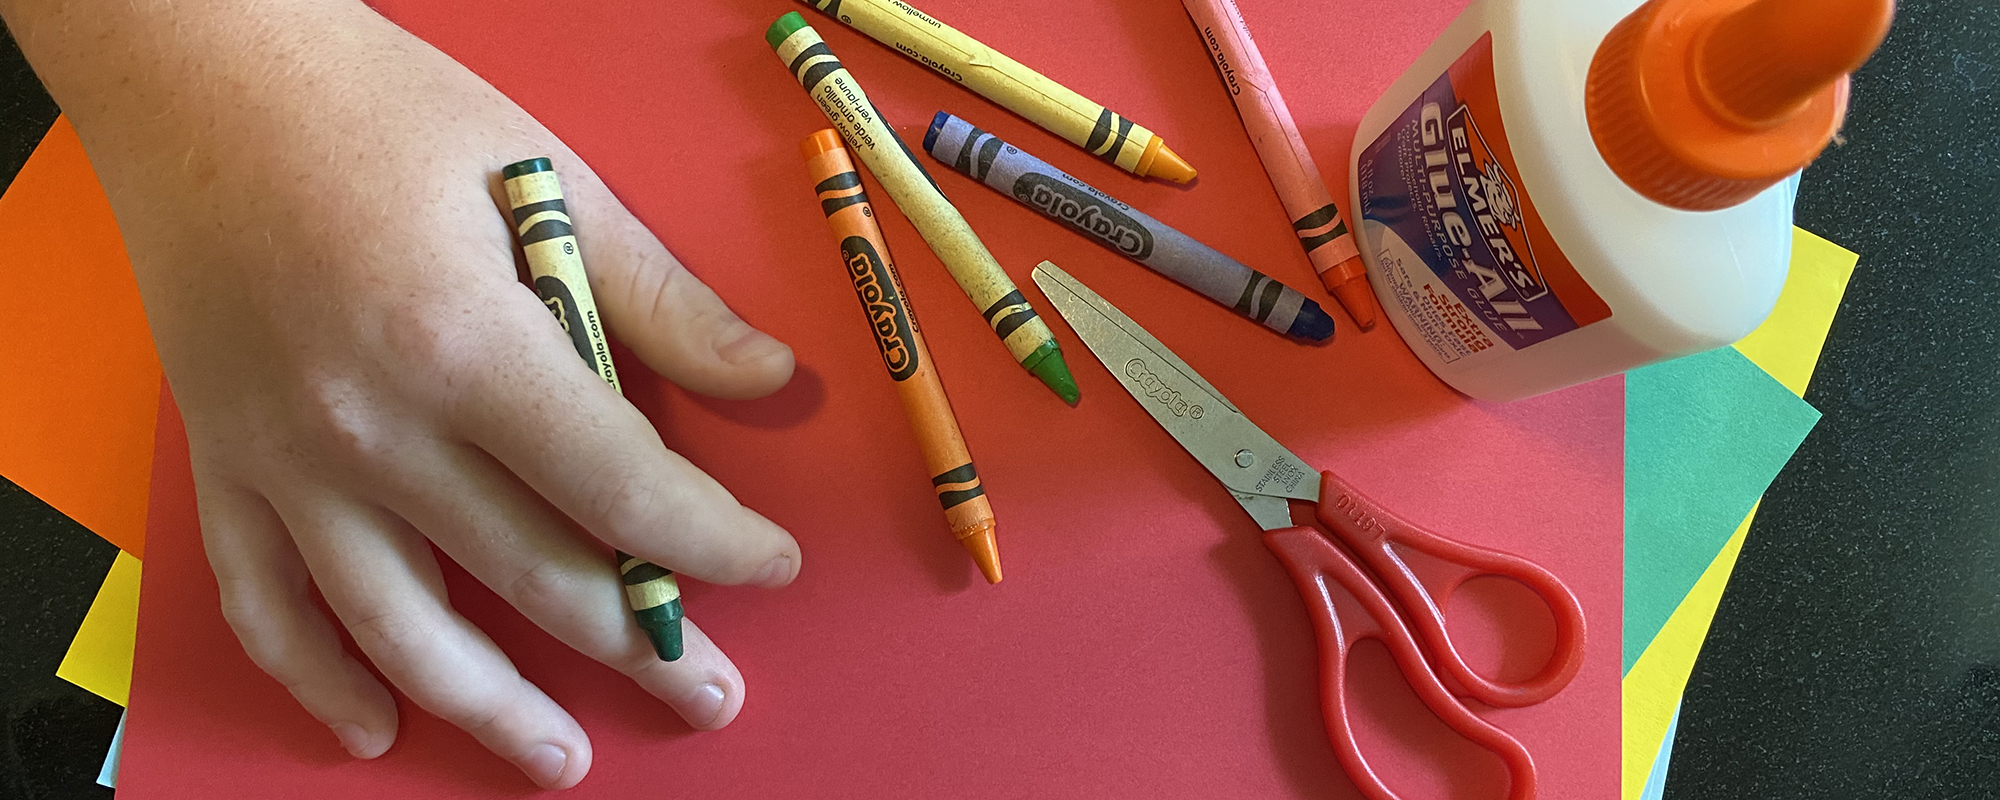 Drawing from the Collection for Children - Crayons, Scissors, and Glue